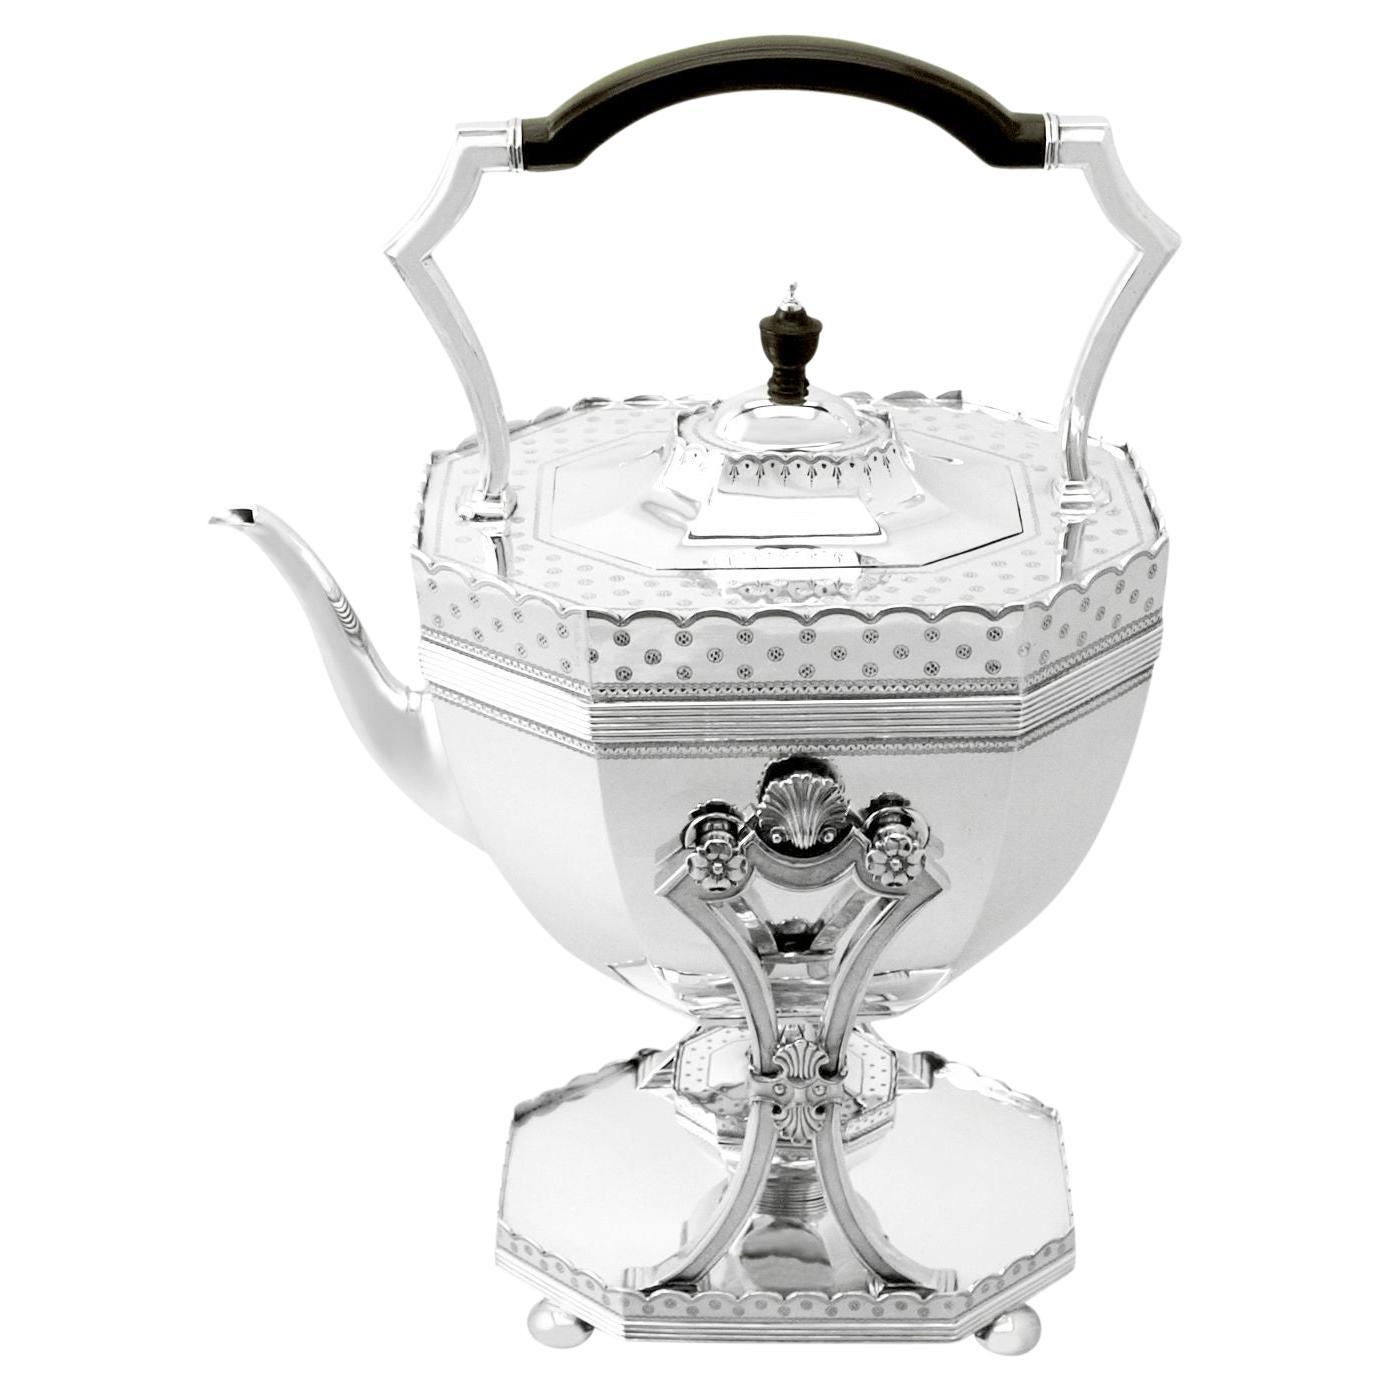 Dobson & Sons Antique Victorian English Sterling Silver Spirit Kettle